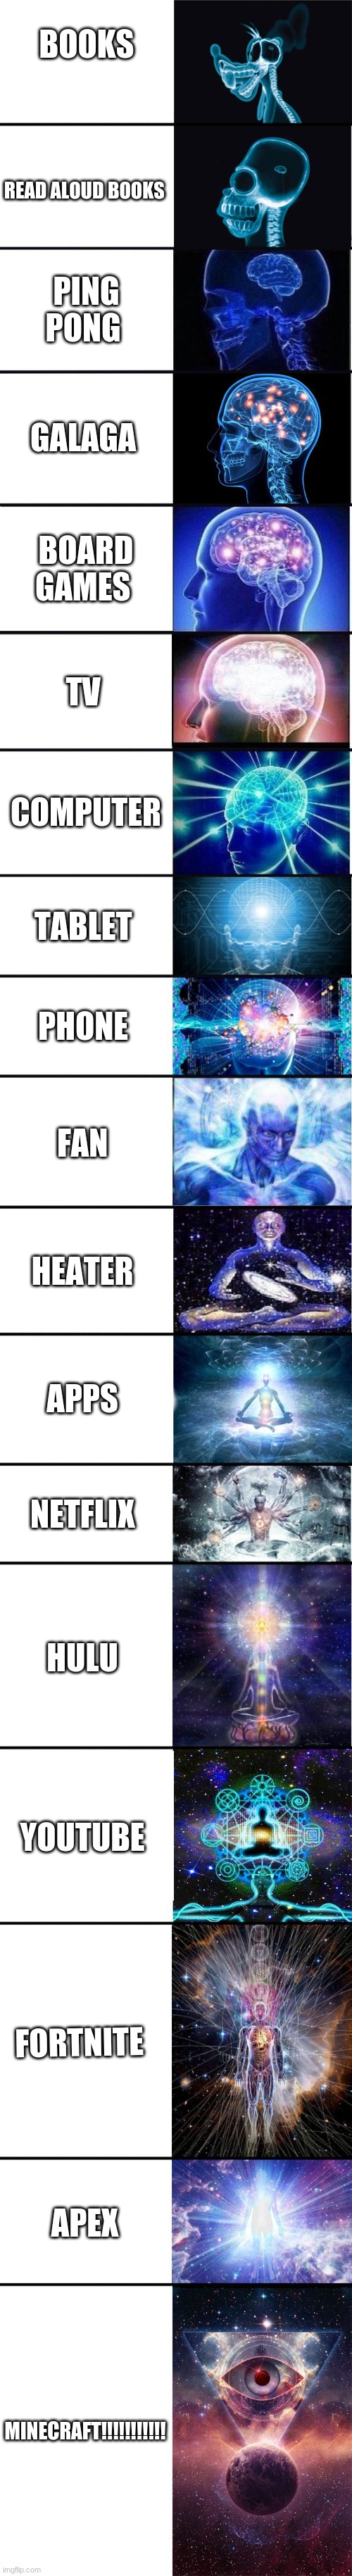 expanding brain: 9001 | BOOKS; READ ALOUD BOOKS; PING PONG; GALAGA; BOARD GAMES; TV; COMPUTER; TABLET; PHONE; FAN; HEATER; APPS; NETFLIX; HULU; YOUTUBE; FORTNITE; APEX; MINECRAFT!!!!!!!!!!! | image tagged in expanding brain 9001 | made w/ Imgflip meme maker